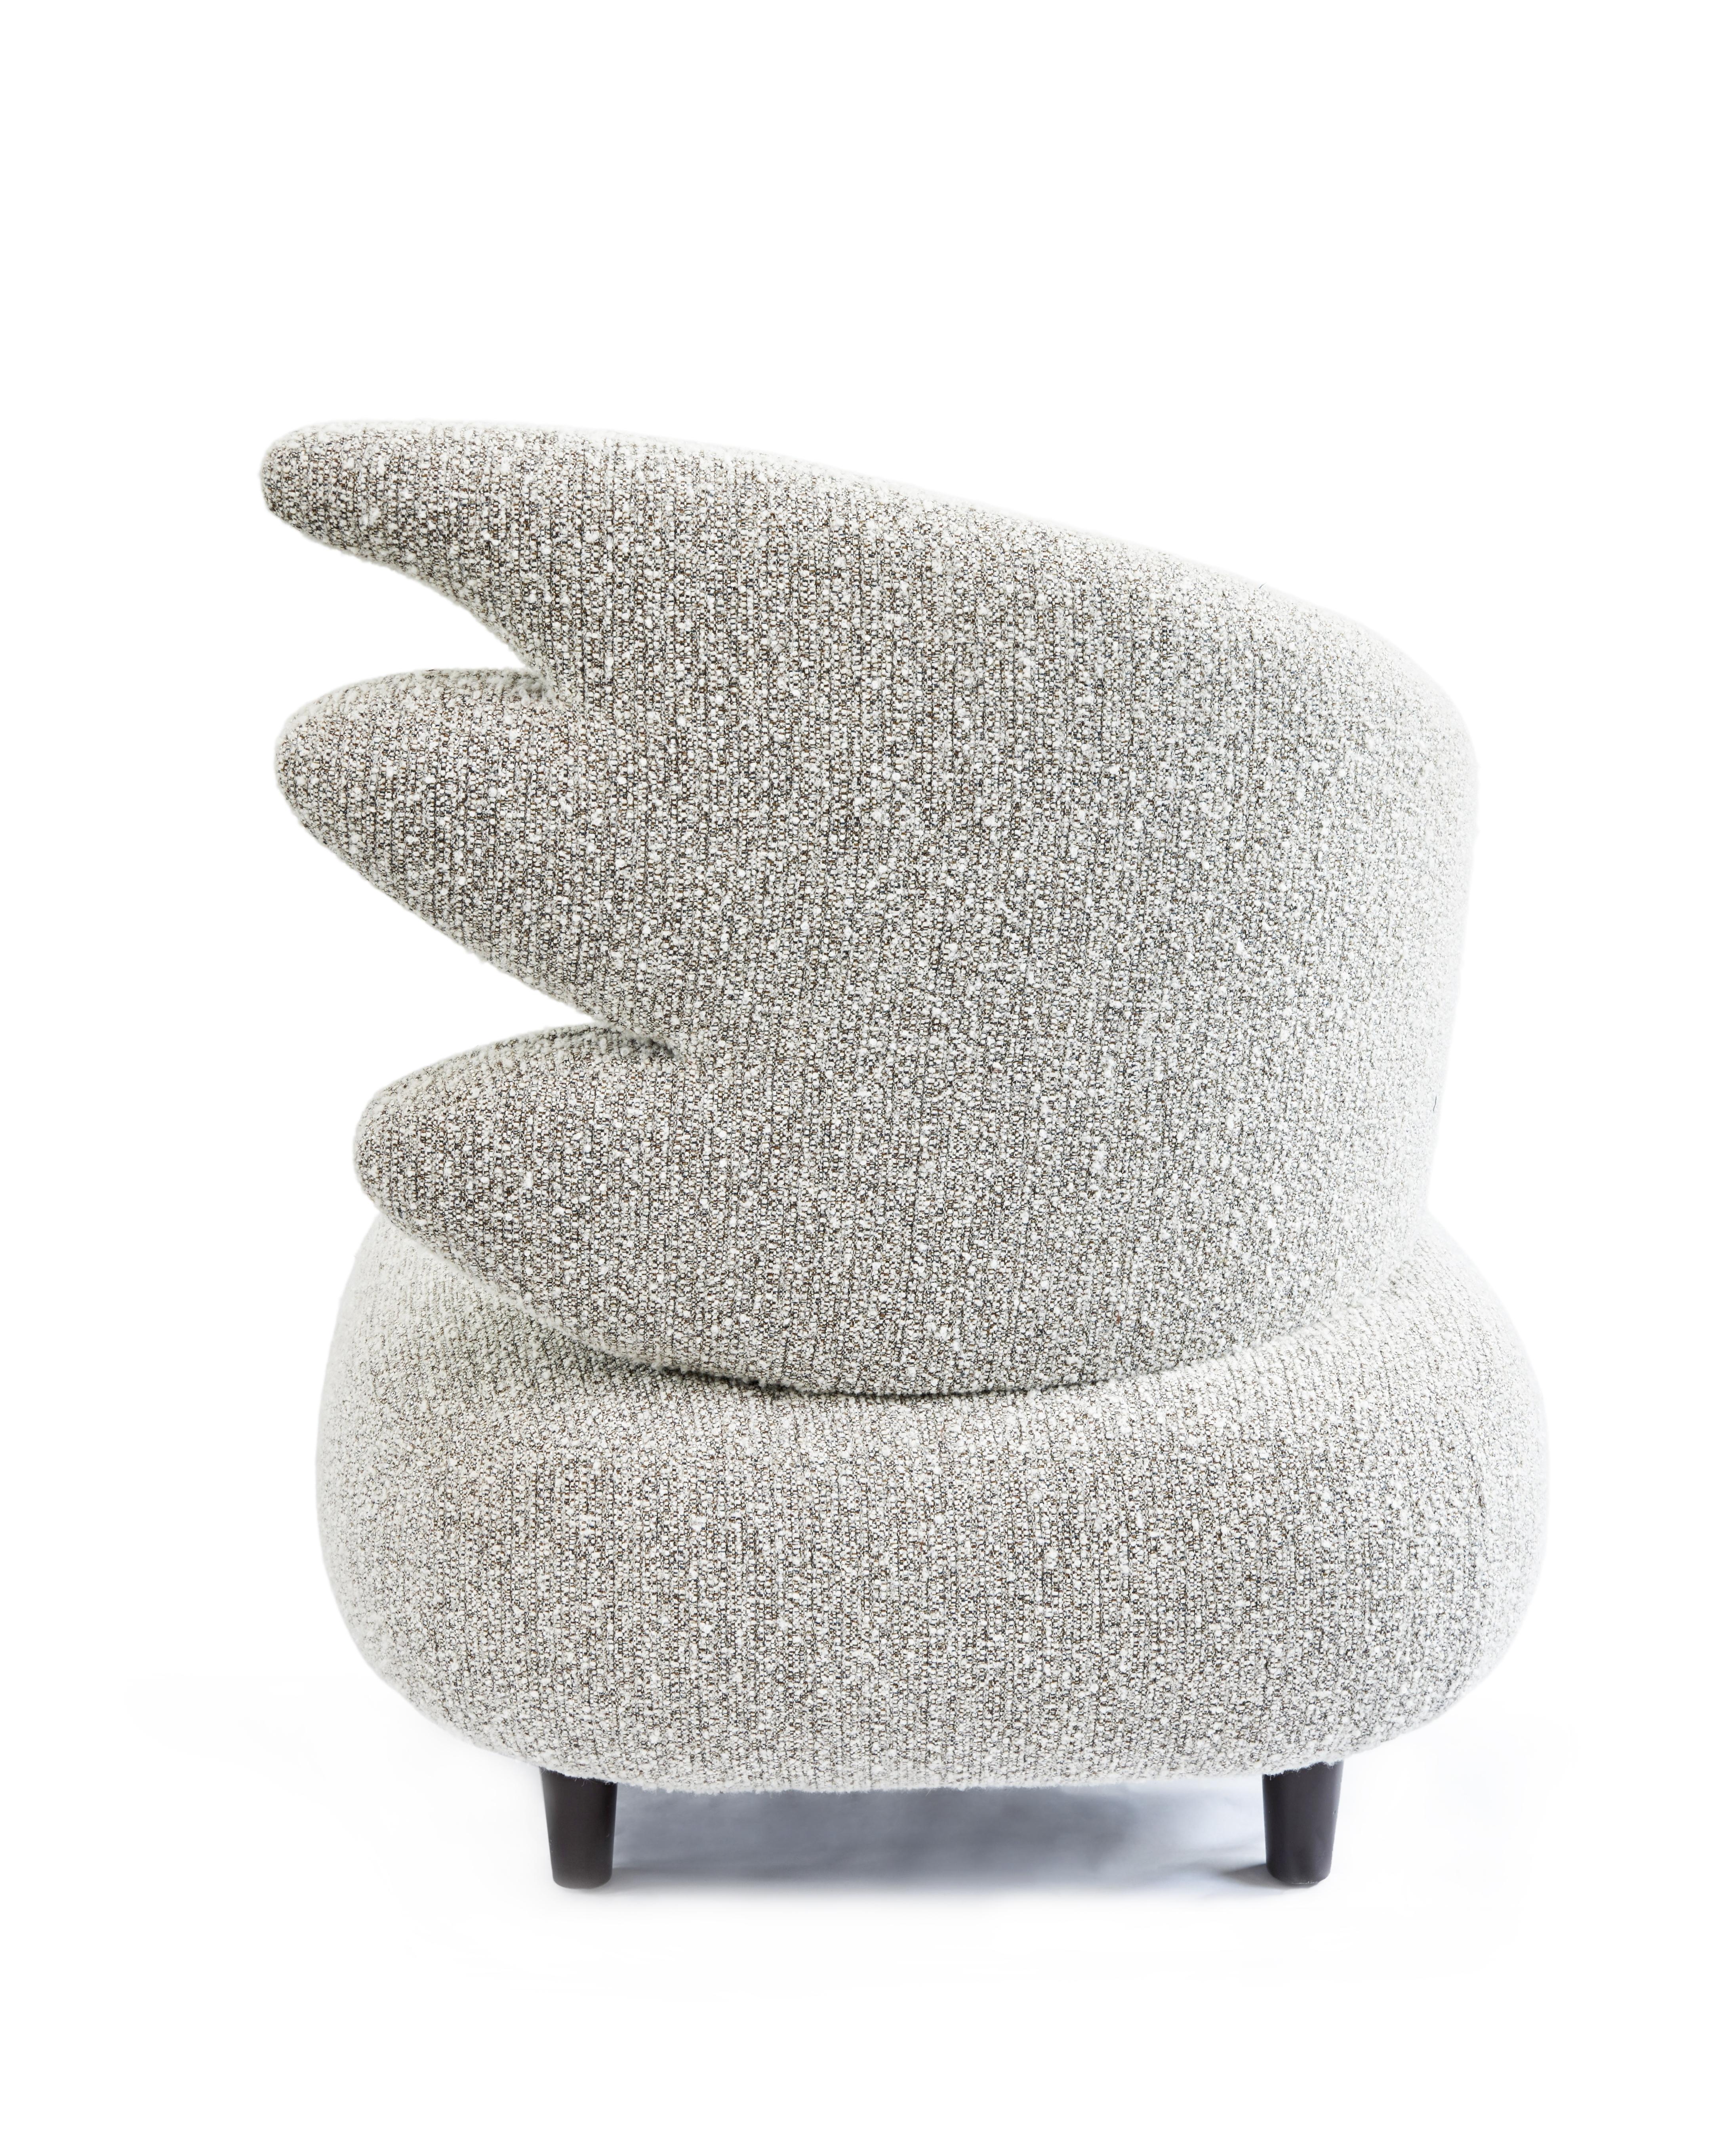 Other Zeus Grey Armchair by Emilie Lemardeley For Sale